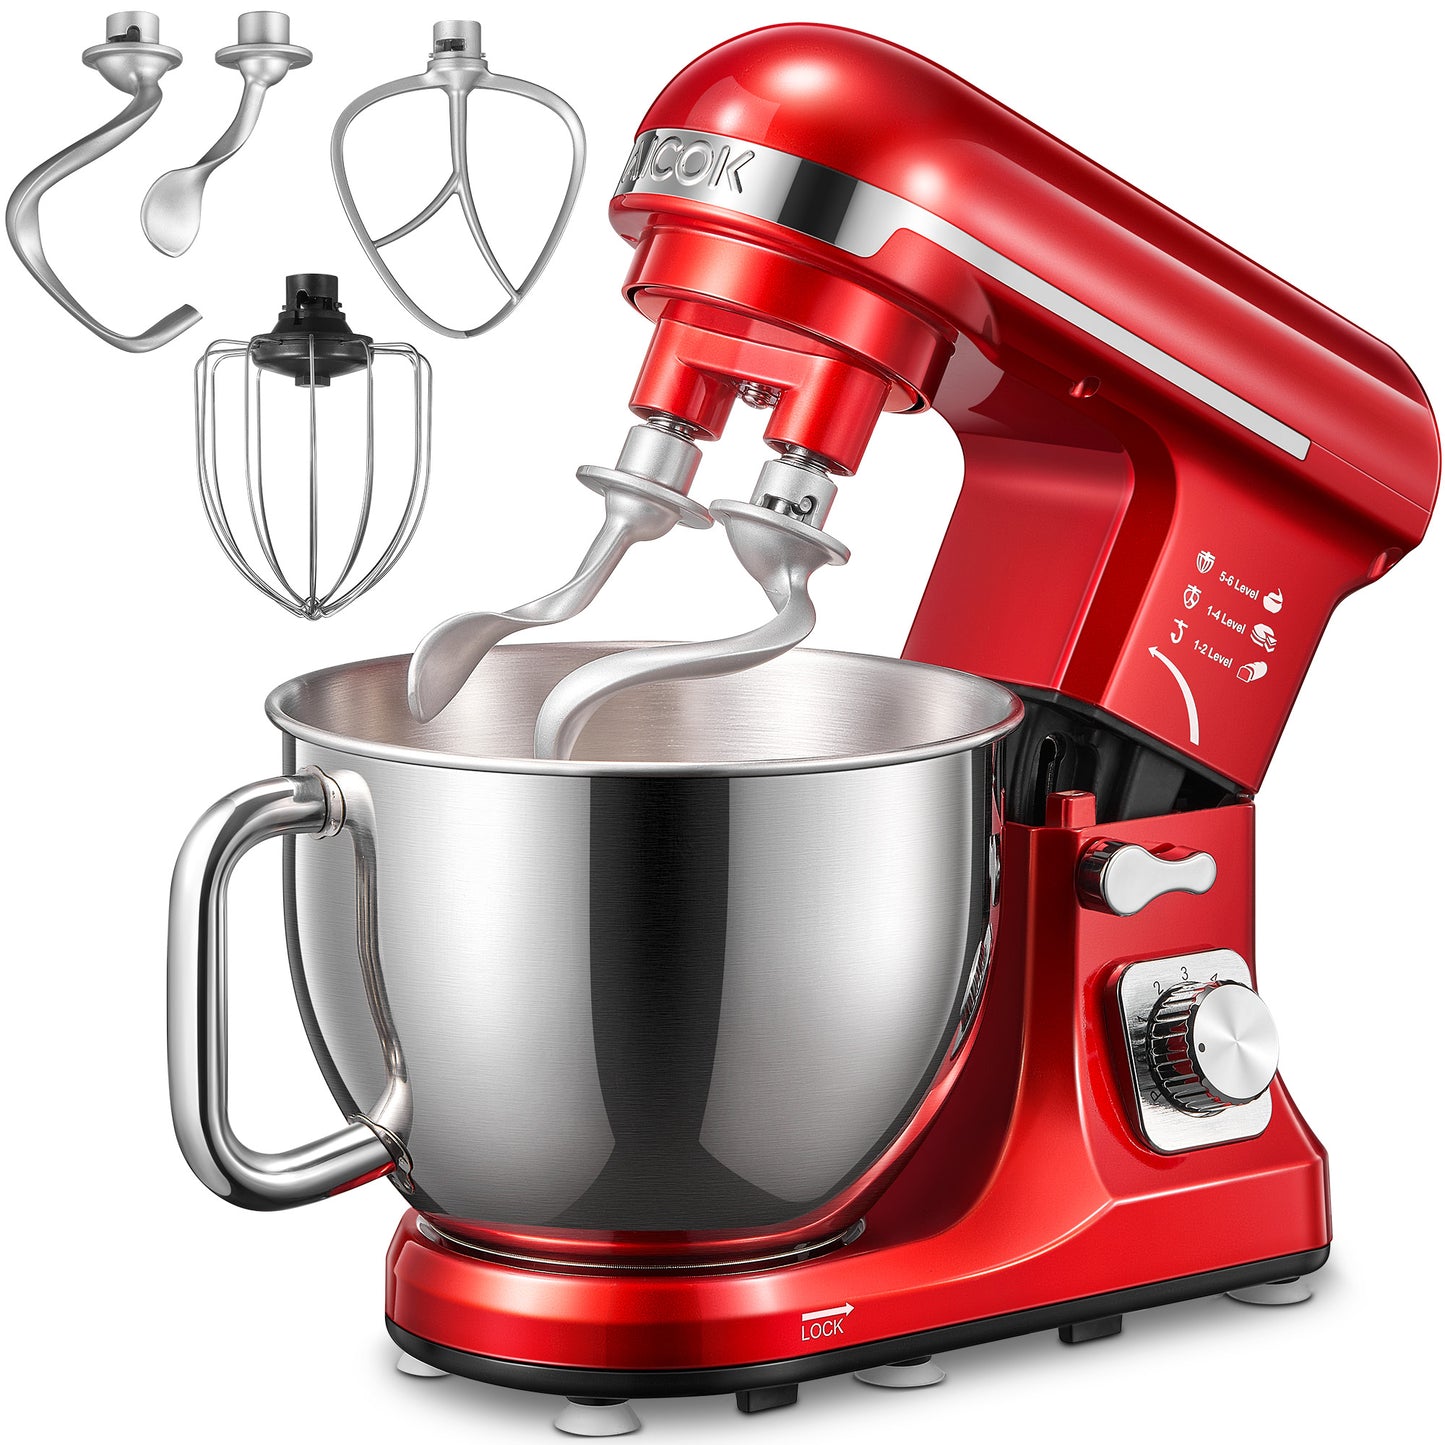 AICOK |  5.5QT Stand Mixer with Double Dough Hook, 6-speed Stainless Steel Bowl, Low Noise, Red